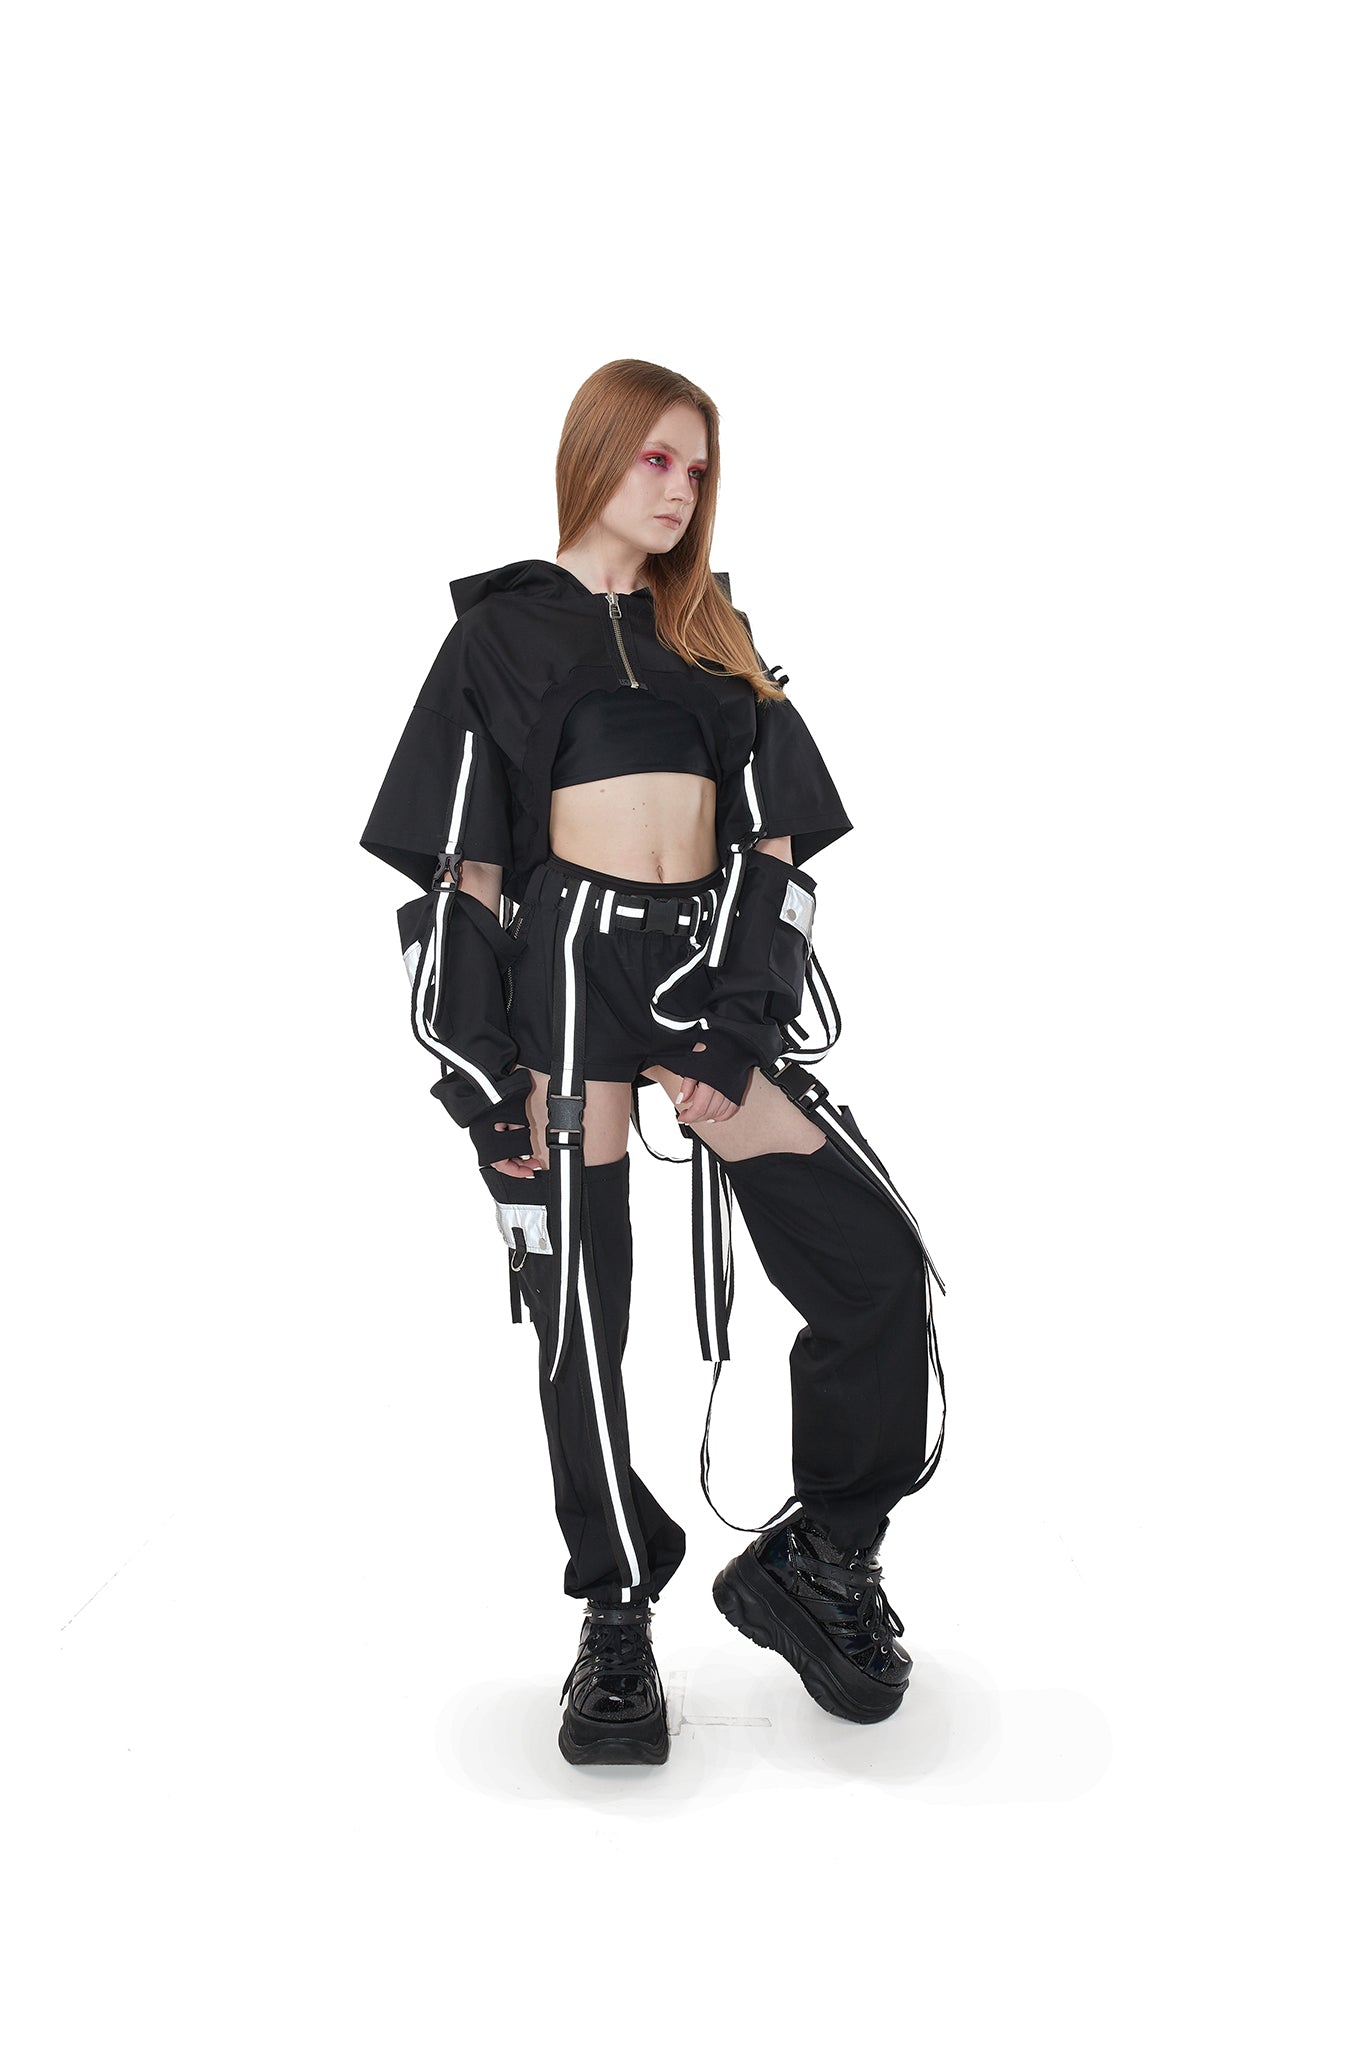 Hooded shrug in Black with reflective straps.